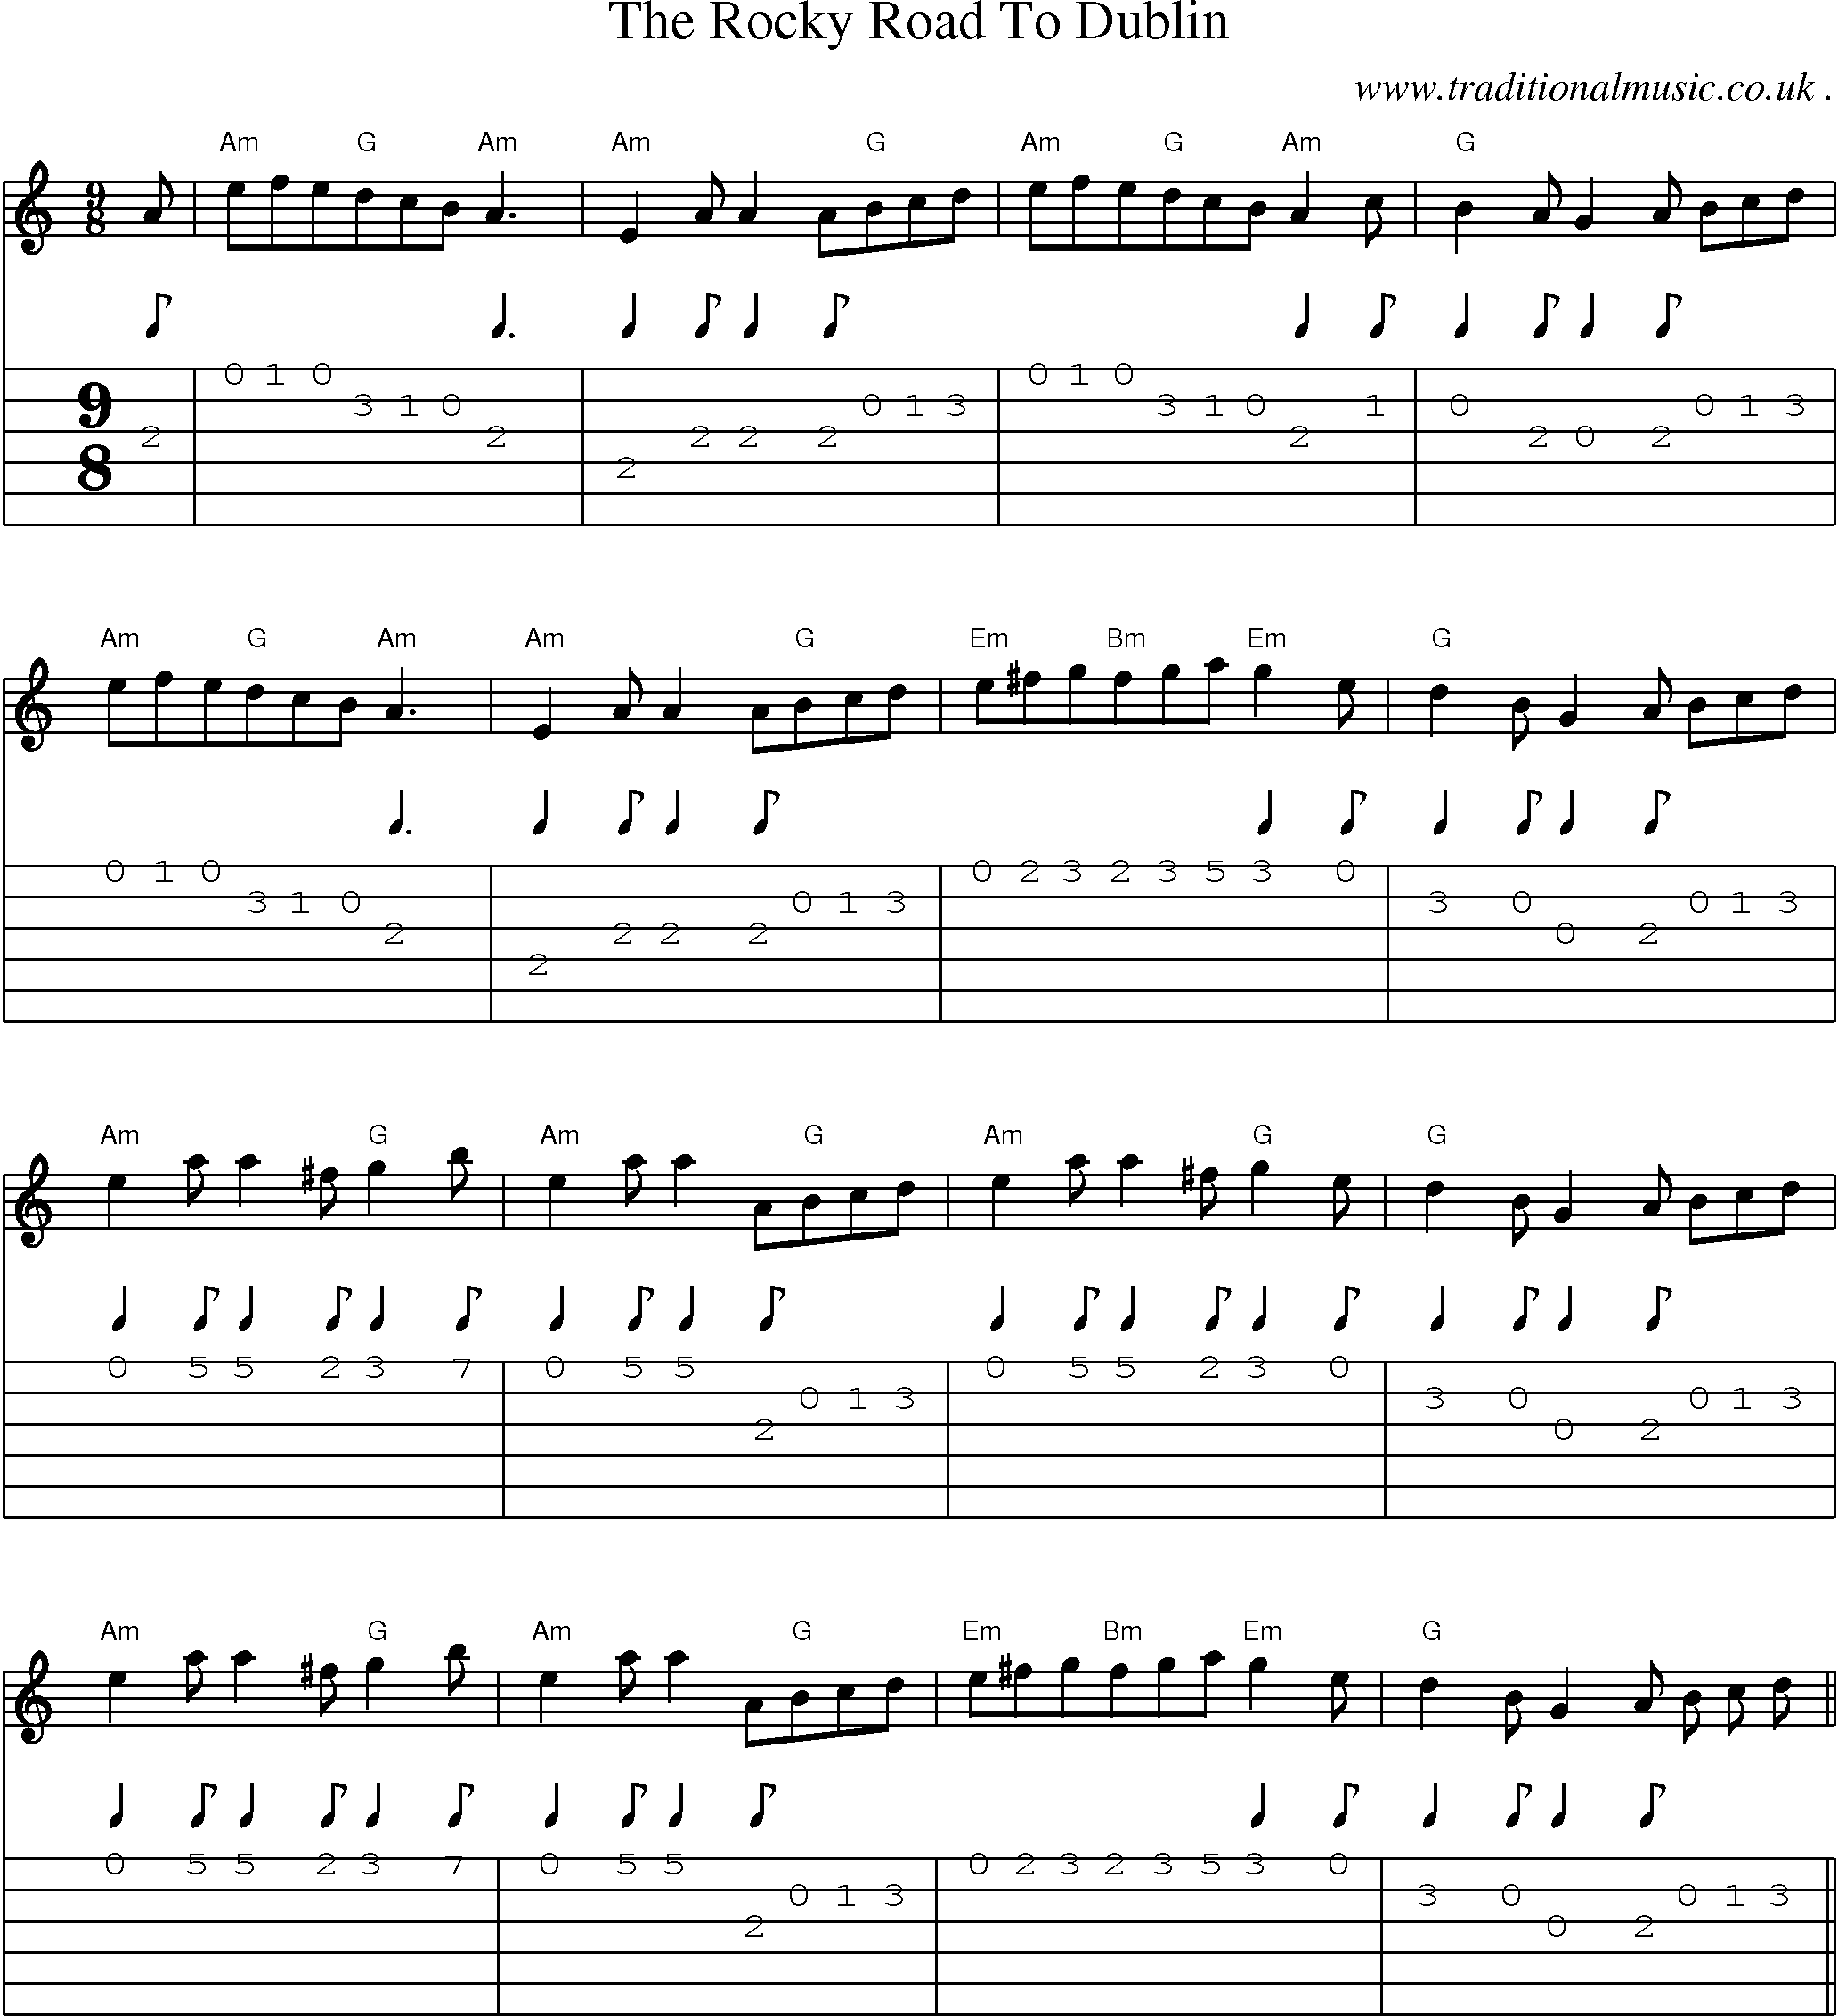 Sheet-Music and Guitar Tabs for The Rocky Road To Dublin